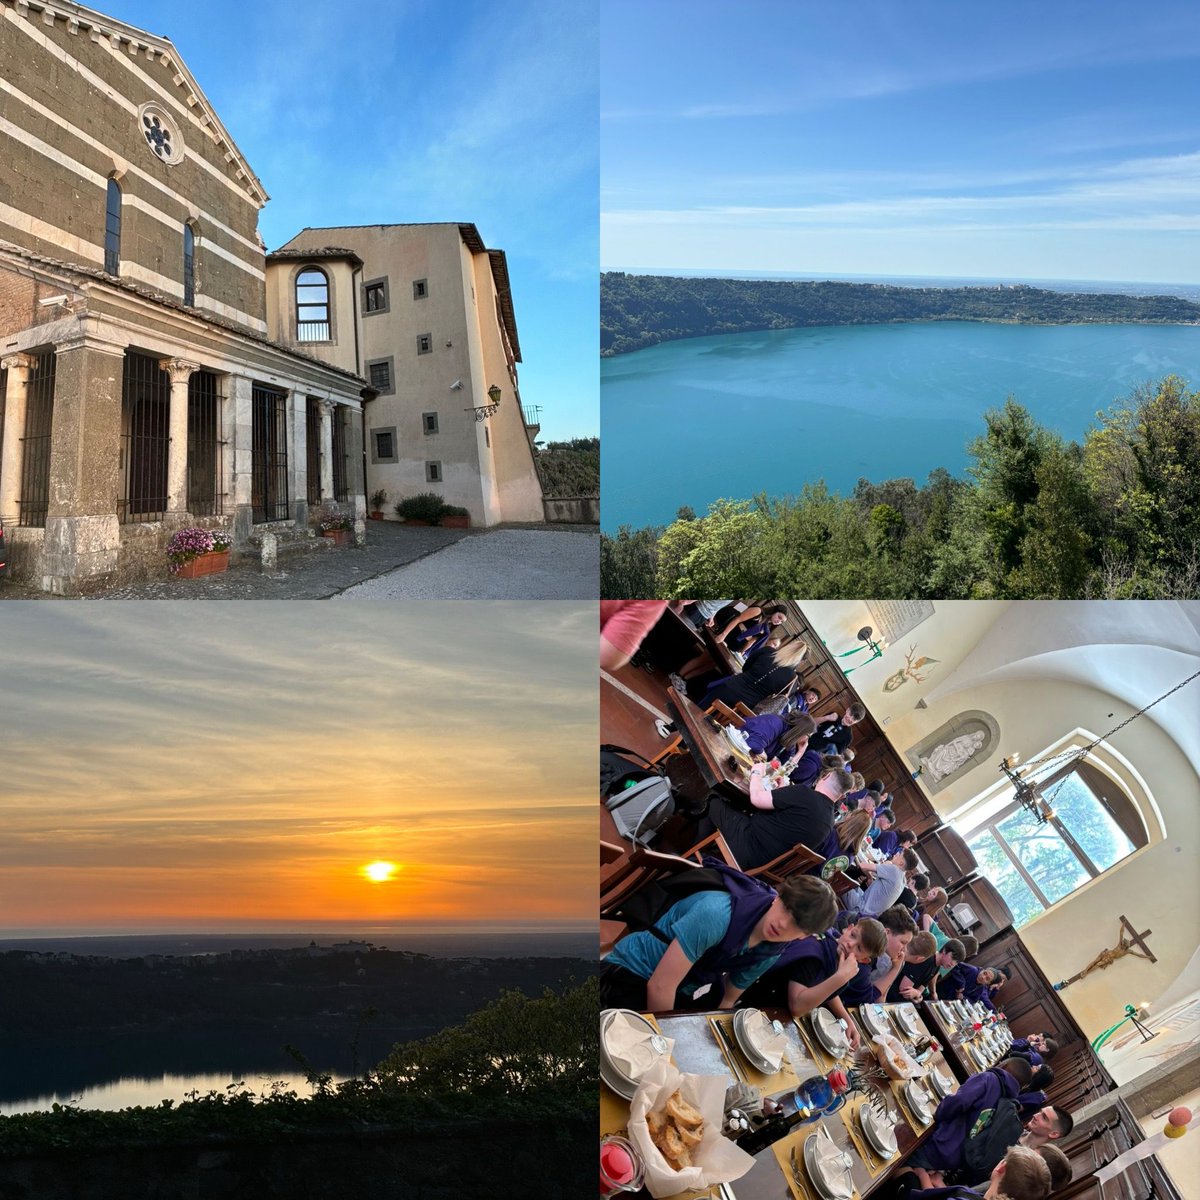 A great day travelling to and acclimatising to our accommodation at Villa Palazolla, what an amazing location 💜 #smrchsontour #Rome2024